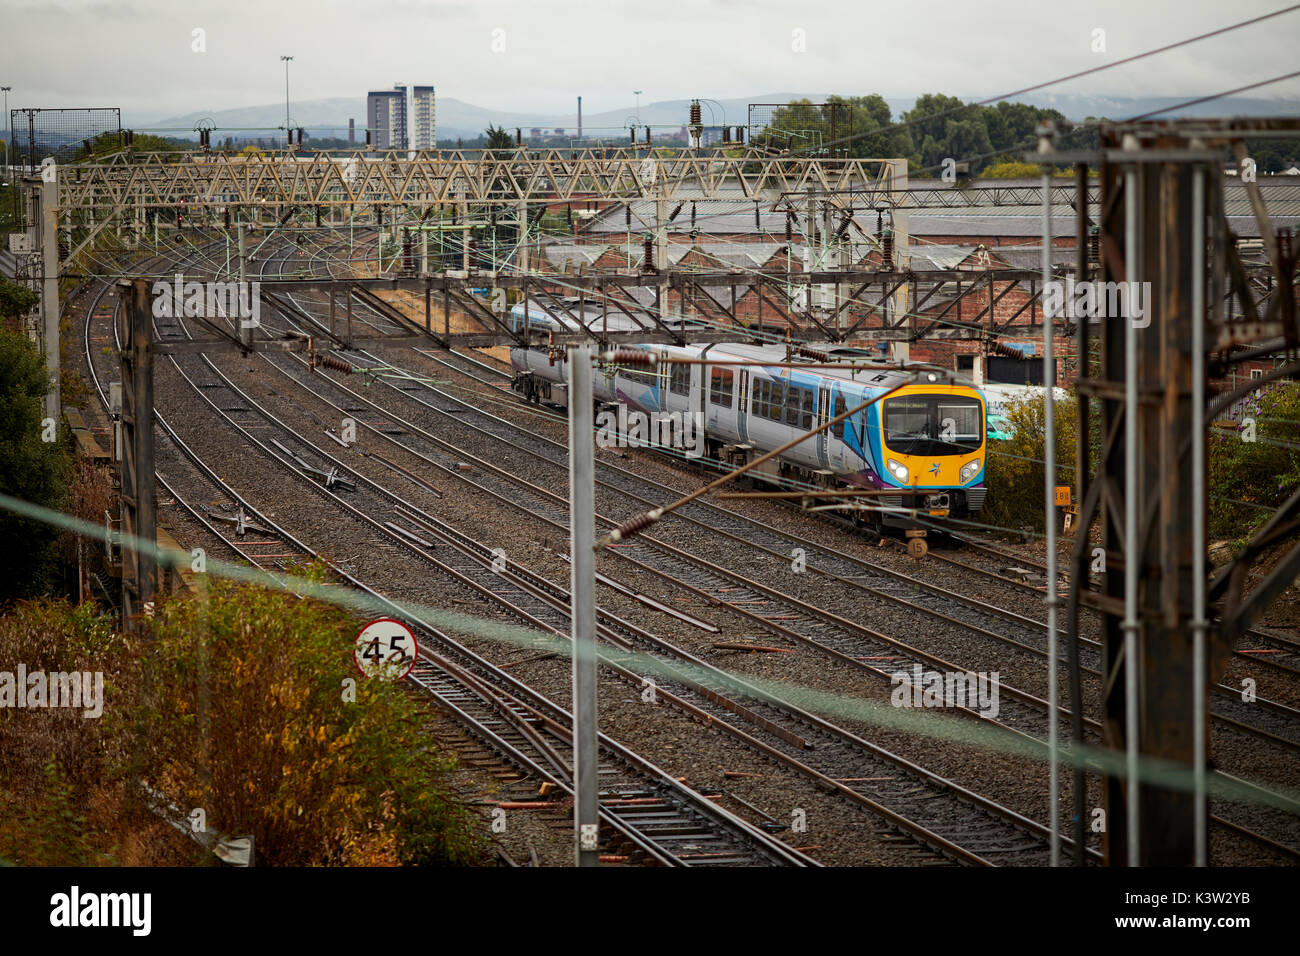 TransPennine Express  franchise  railway line from Ardwick leading to Manchester Piccadilly  terminus station on the West Coast Main Line WCML Stock Photo